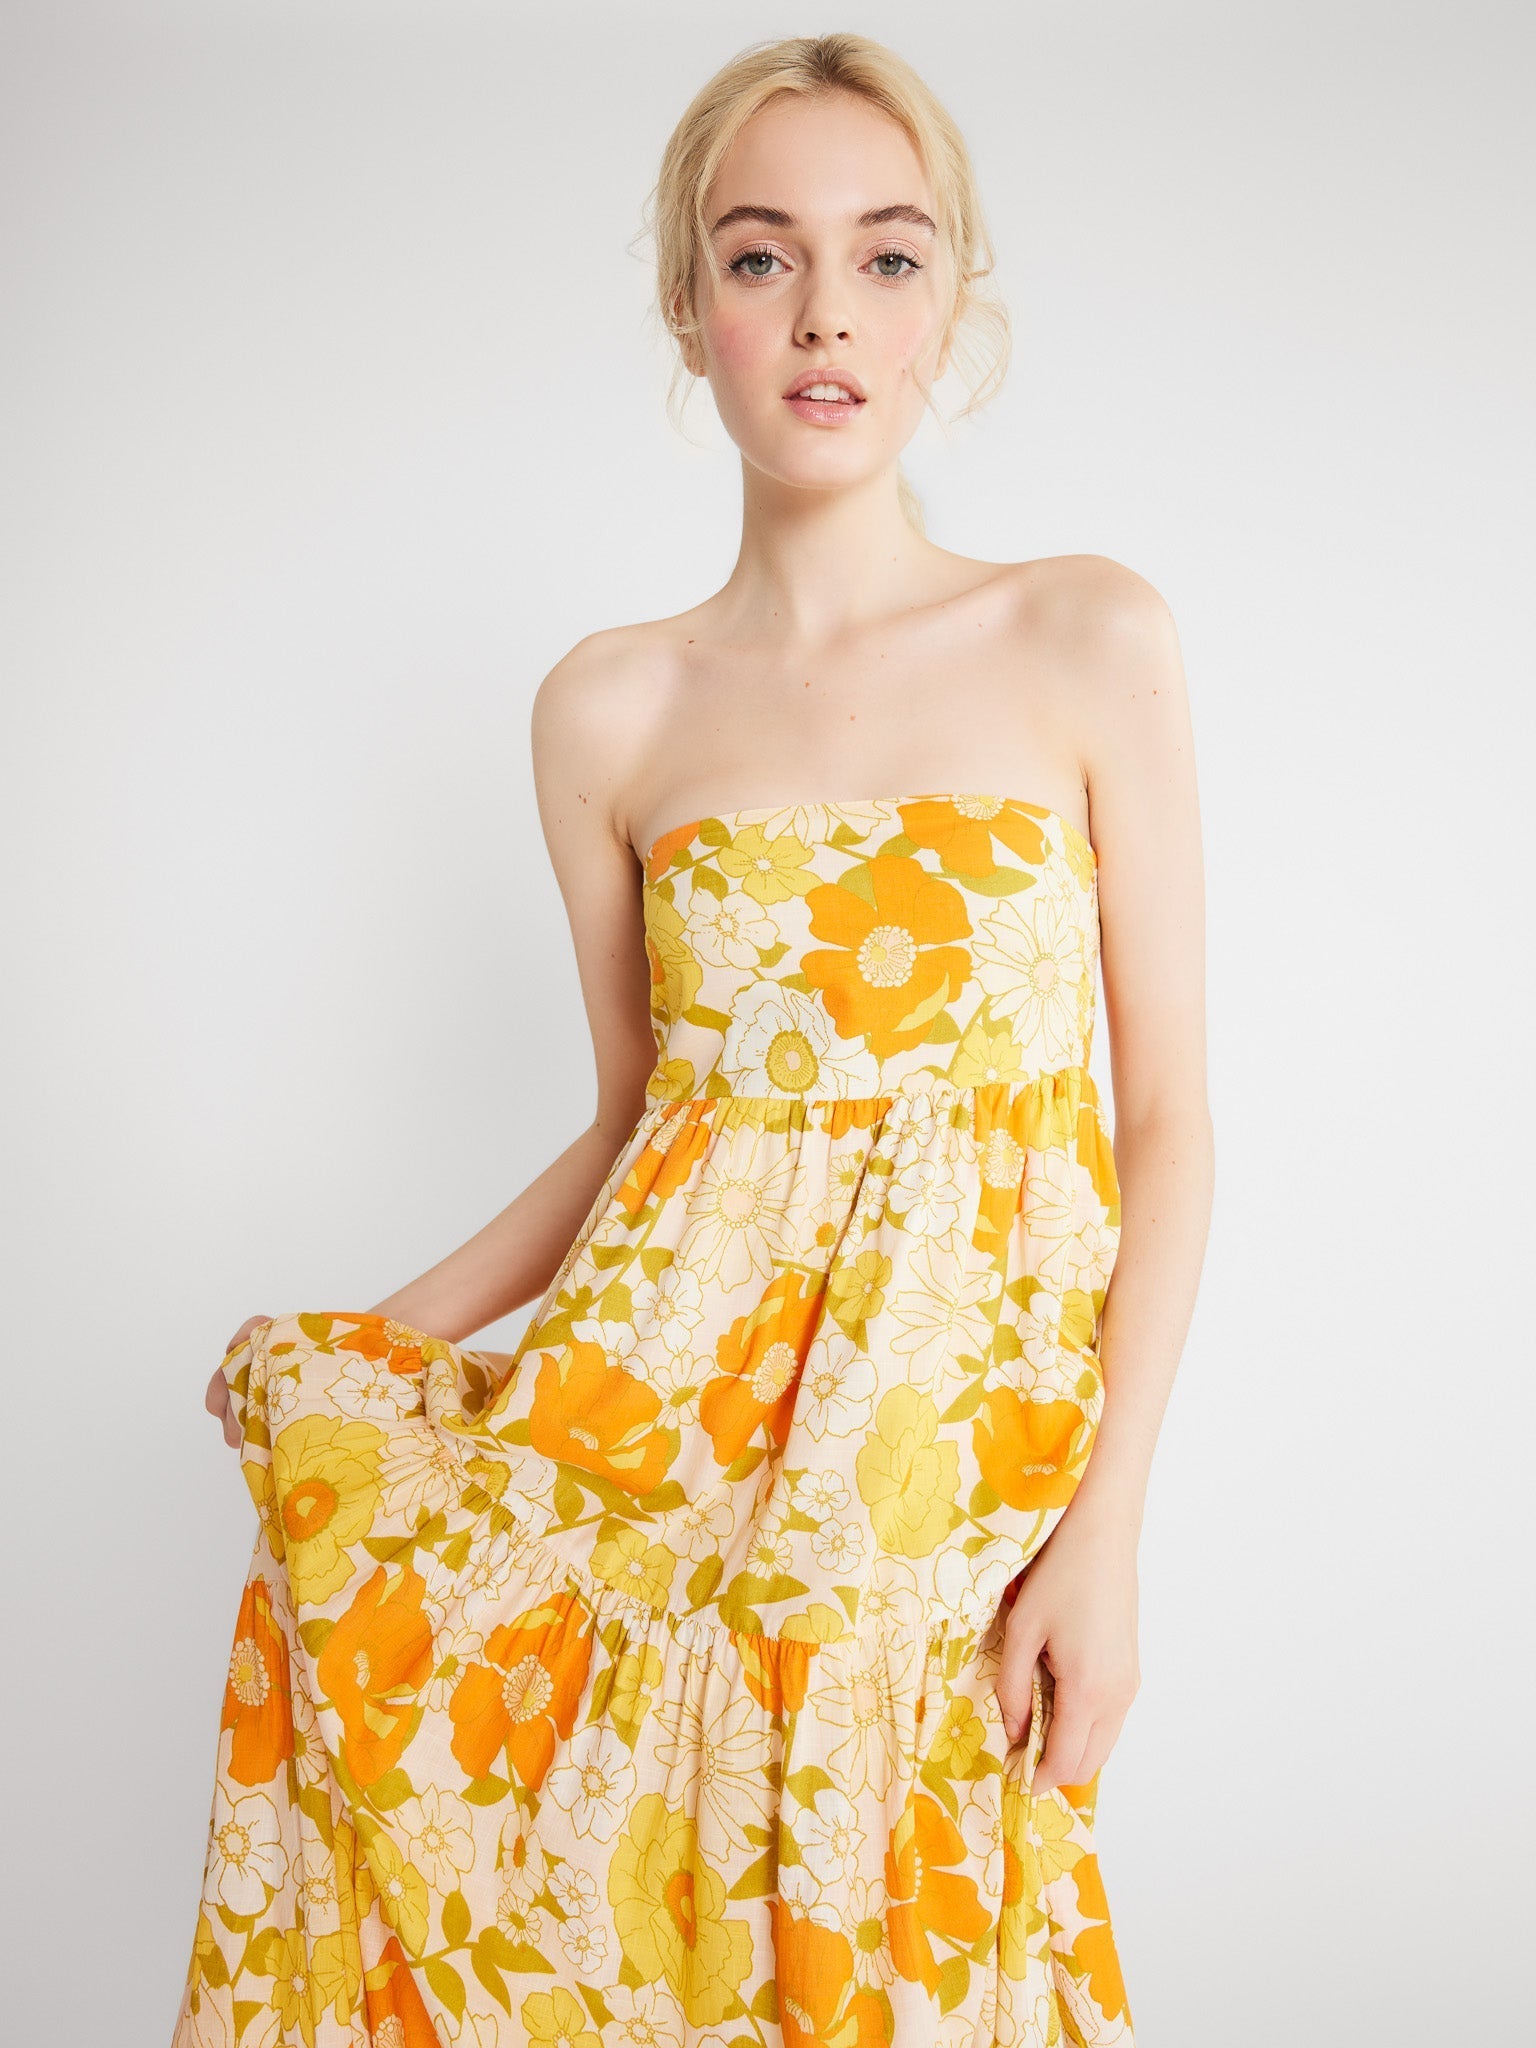 MILLE Clothing Polly Dress in Retro Floral